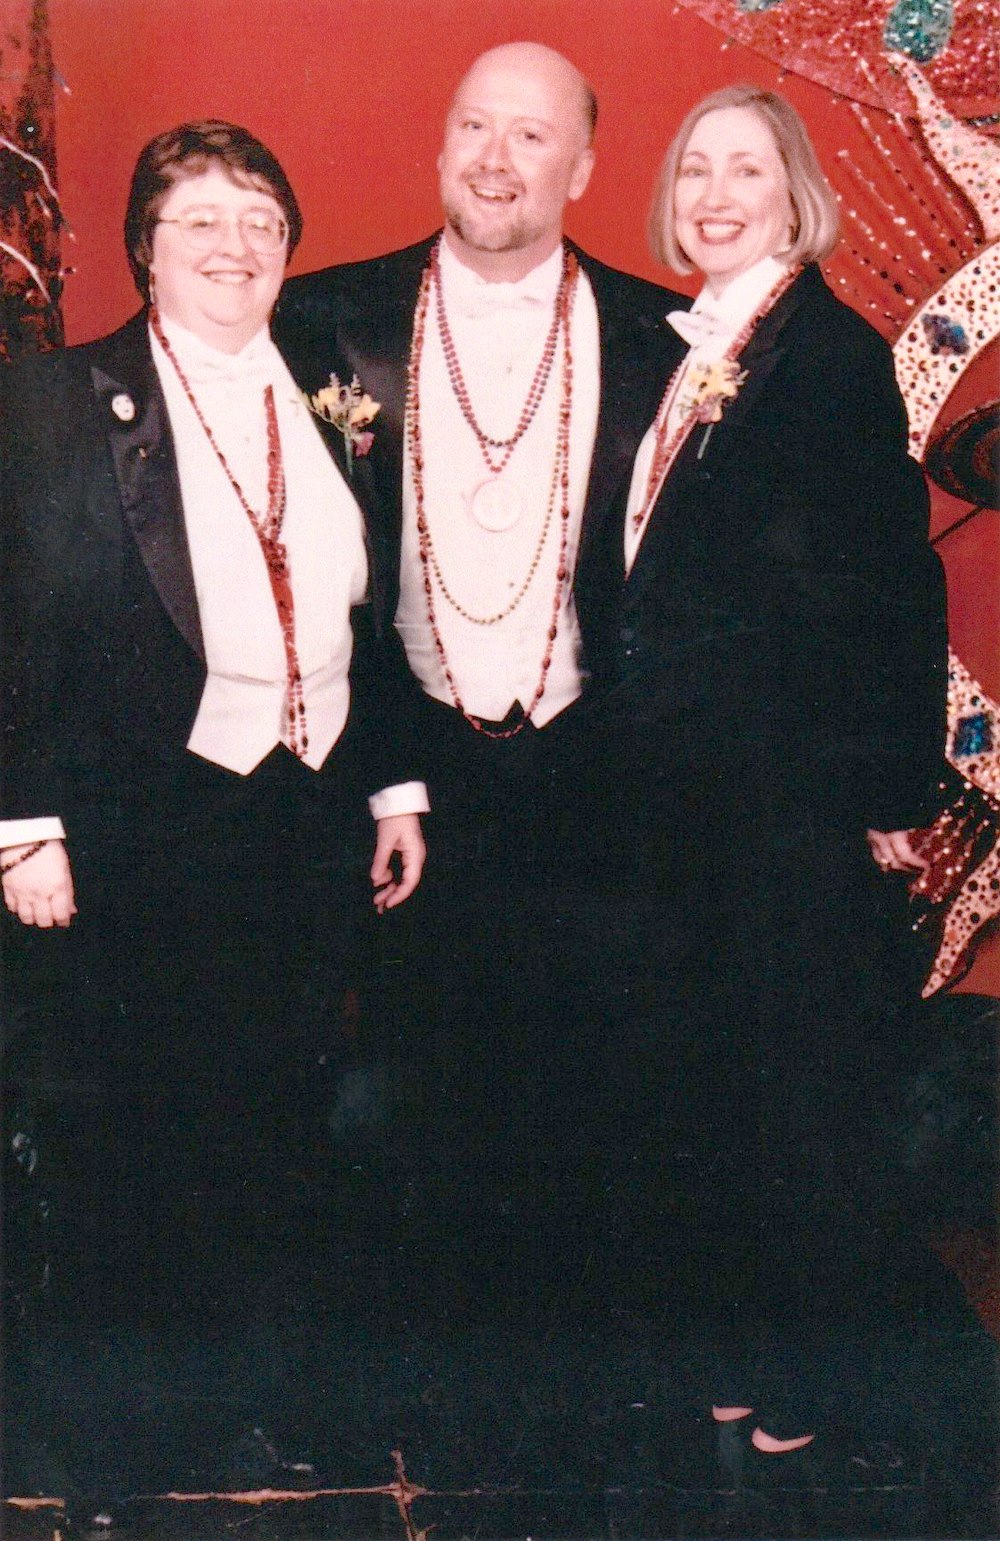 Kathie Hiers, Steve Mozino (who died in 2007), and Donna Bark at the Osiris Mardi Gras Ball, 1996. Photo courtesy of Kathie Hiers.